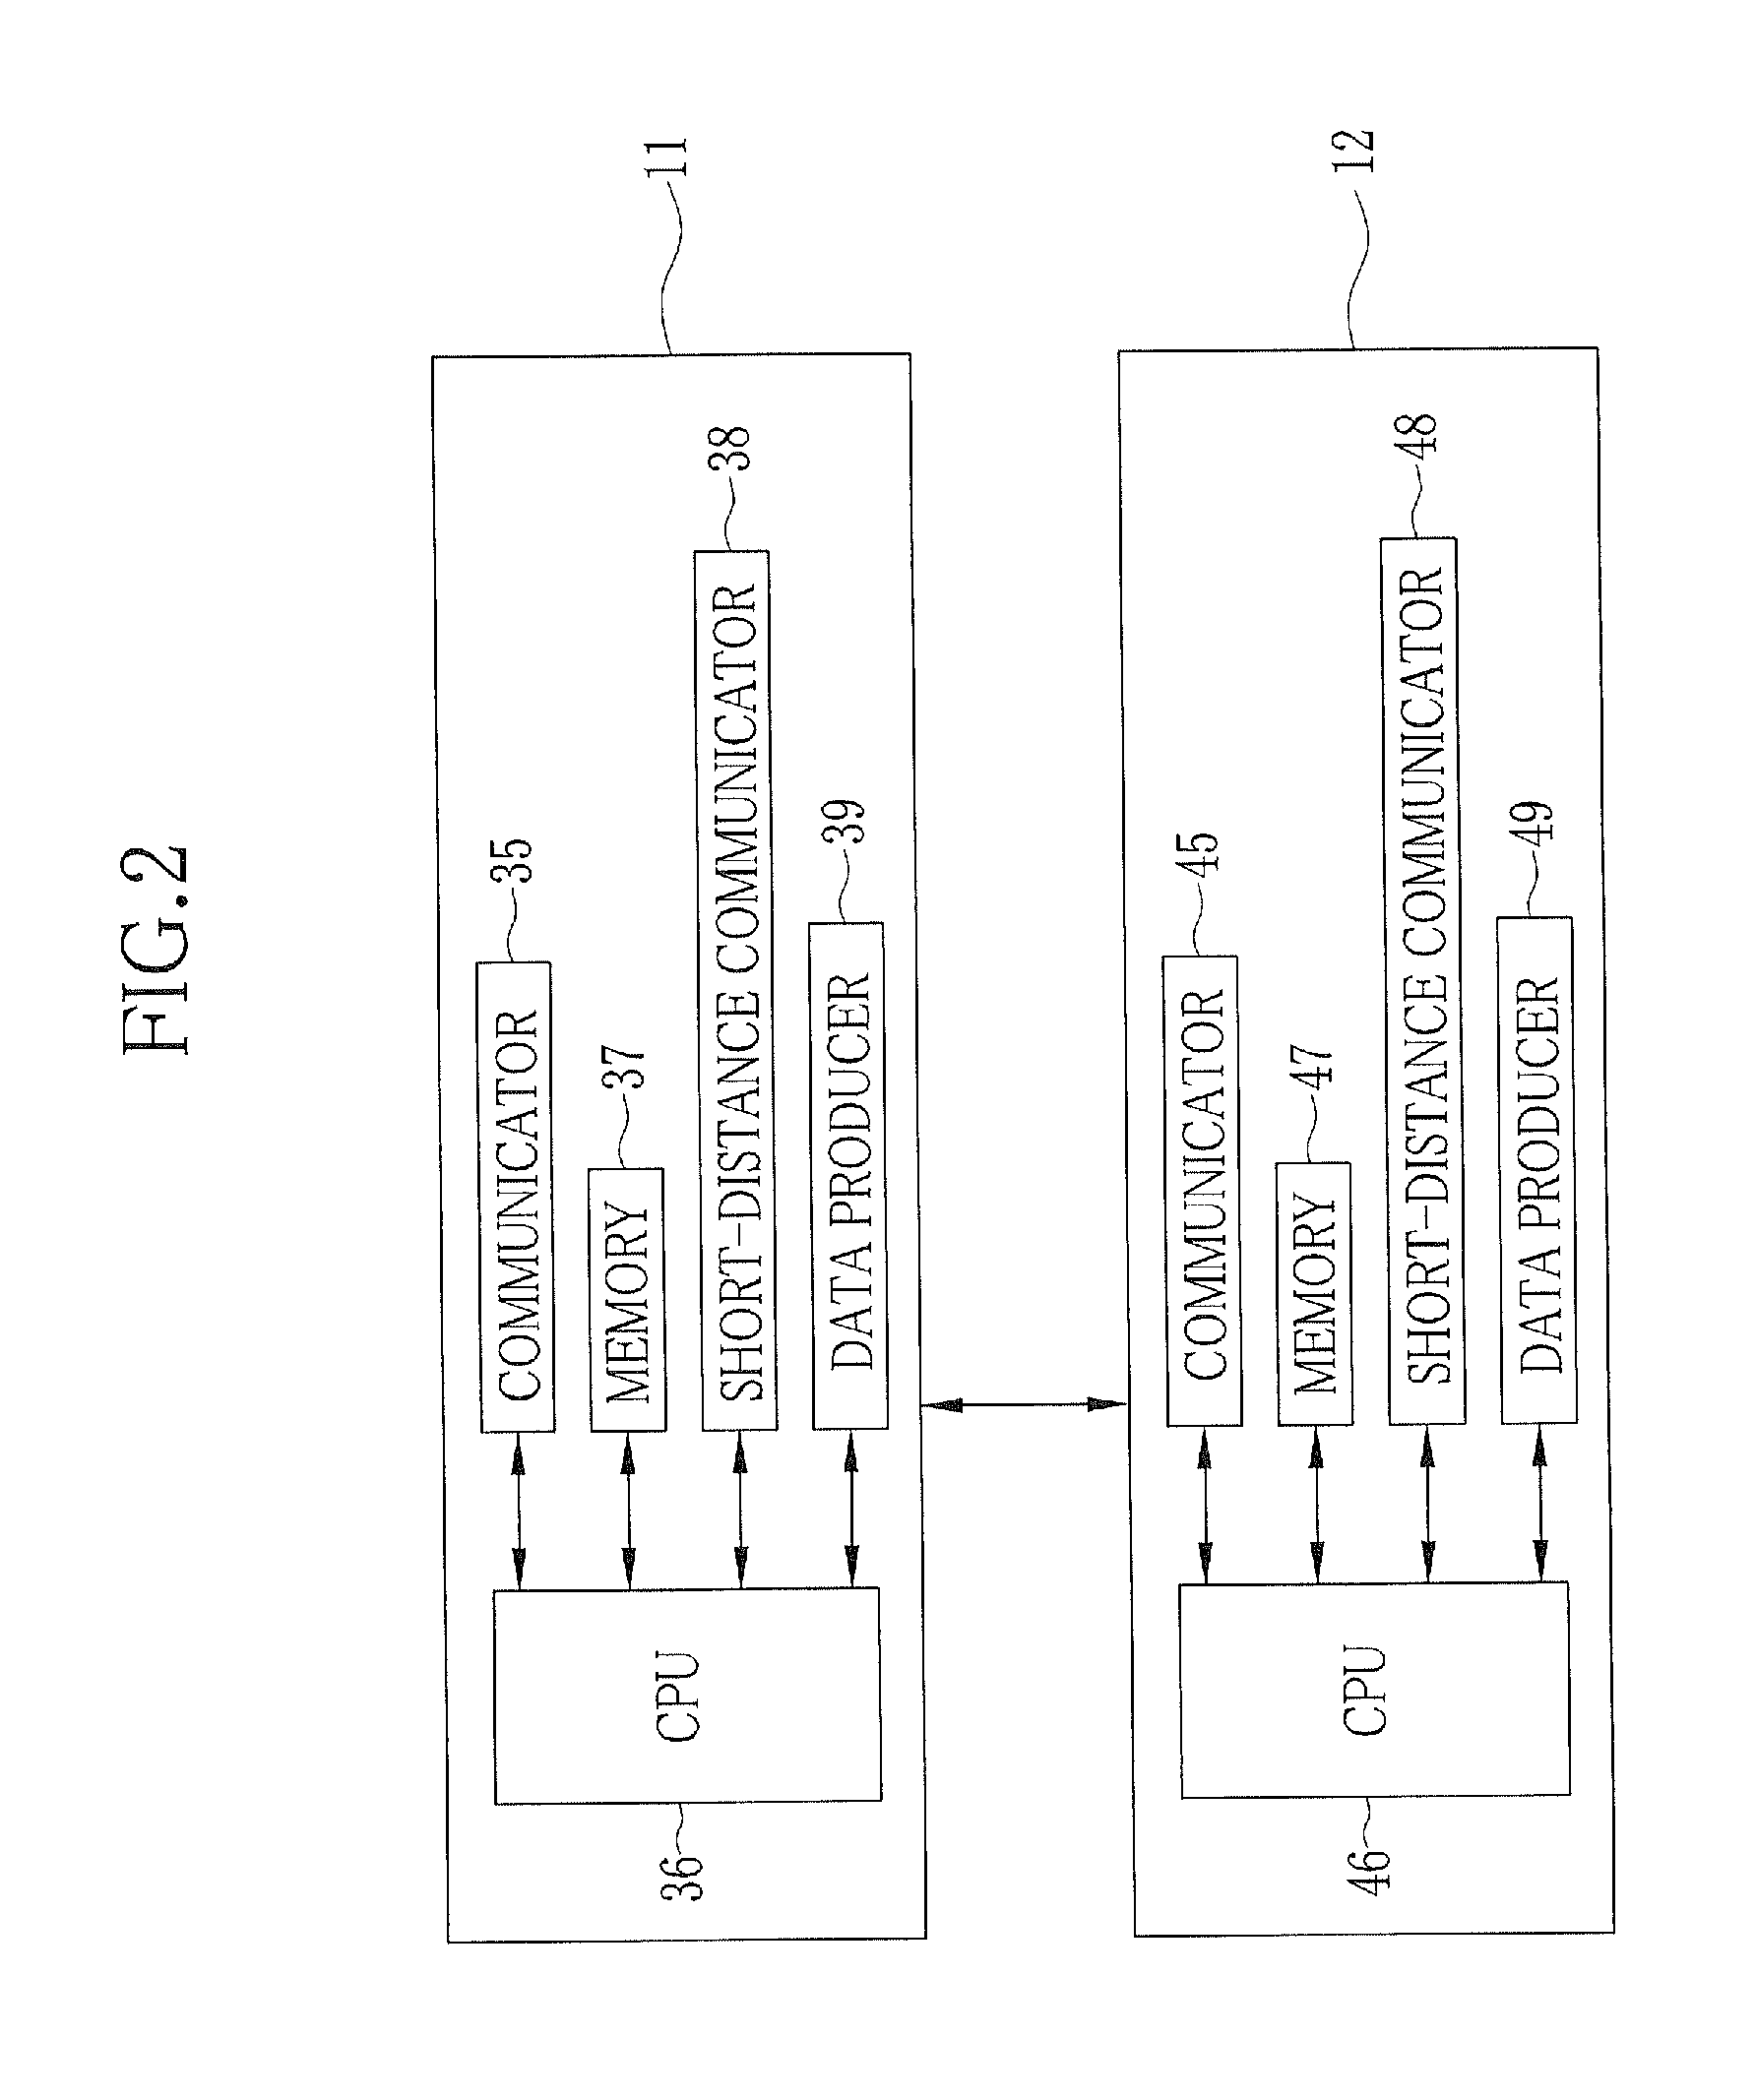 Document browsing system, controlling method therefor, and data server